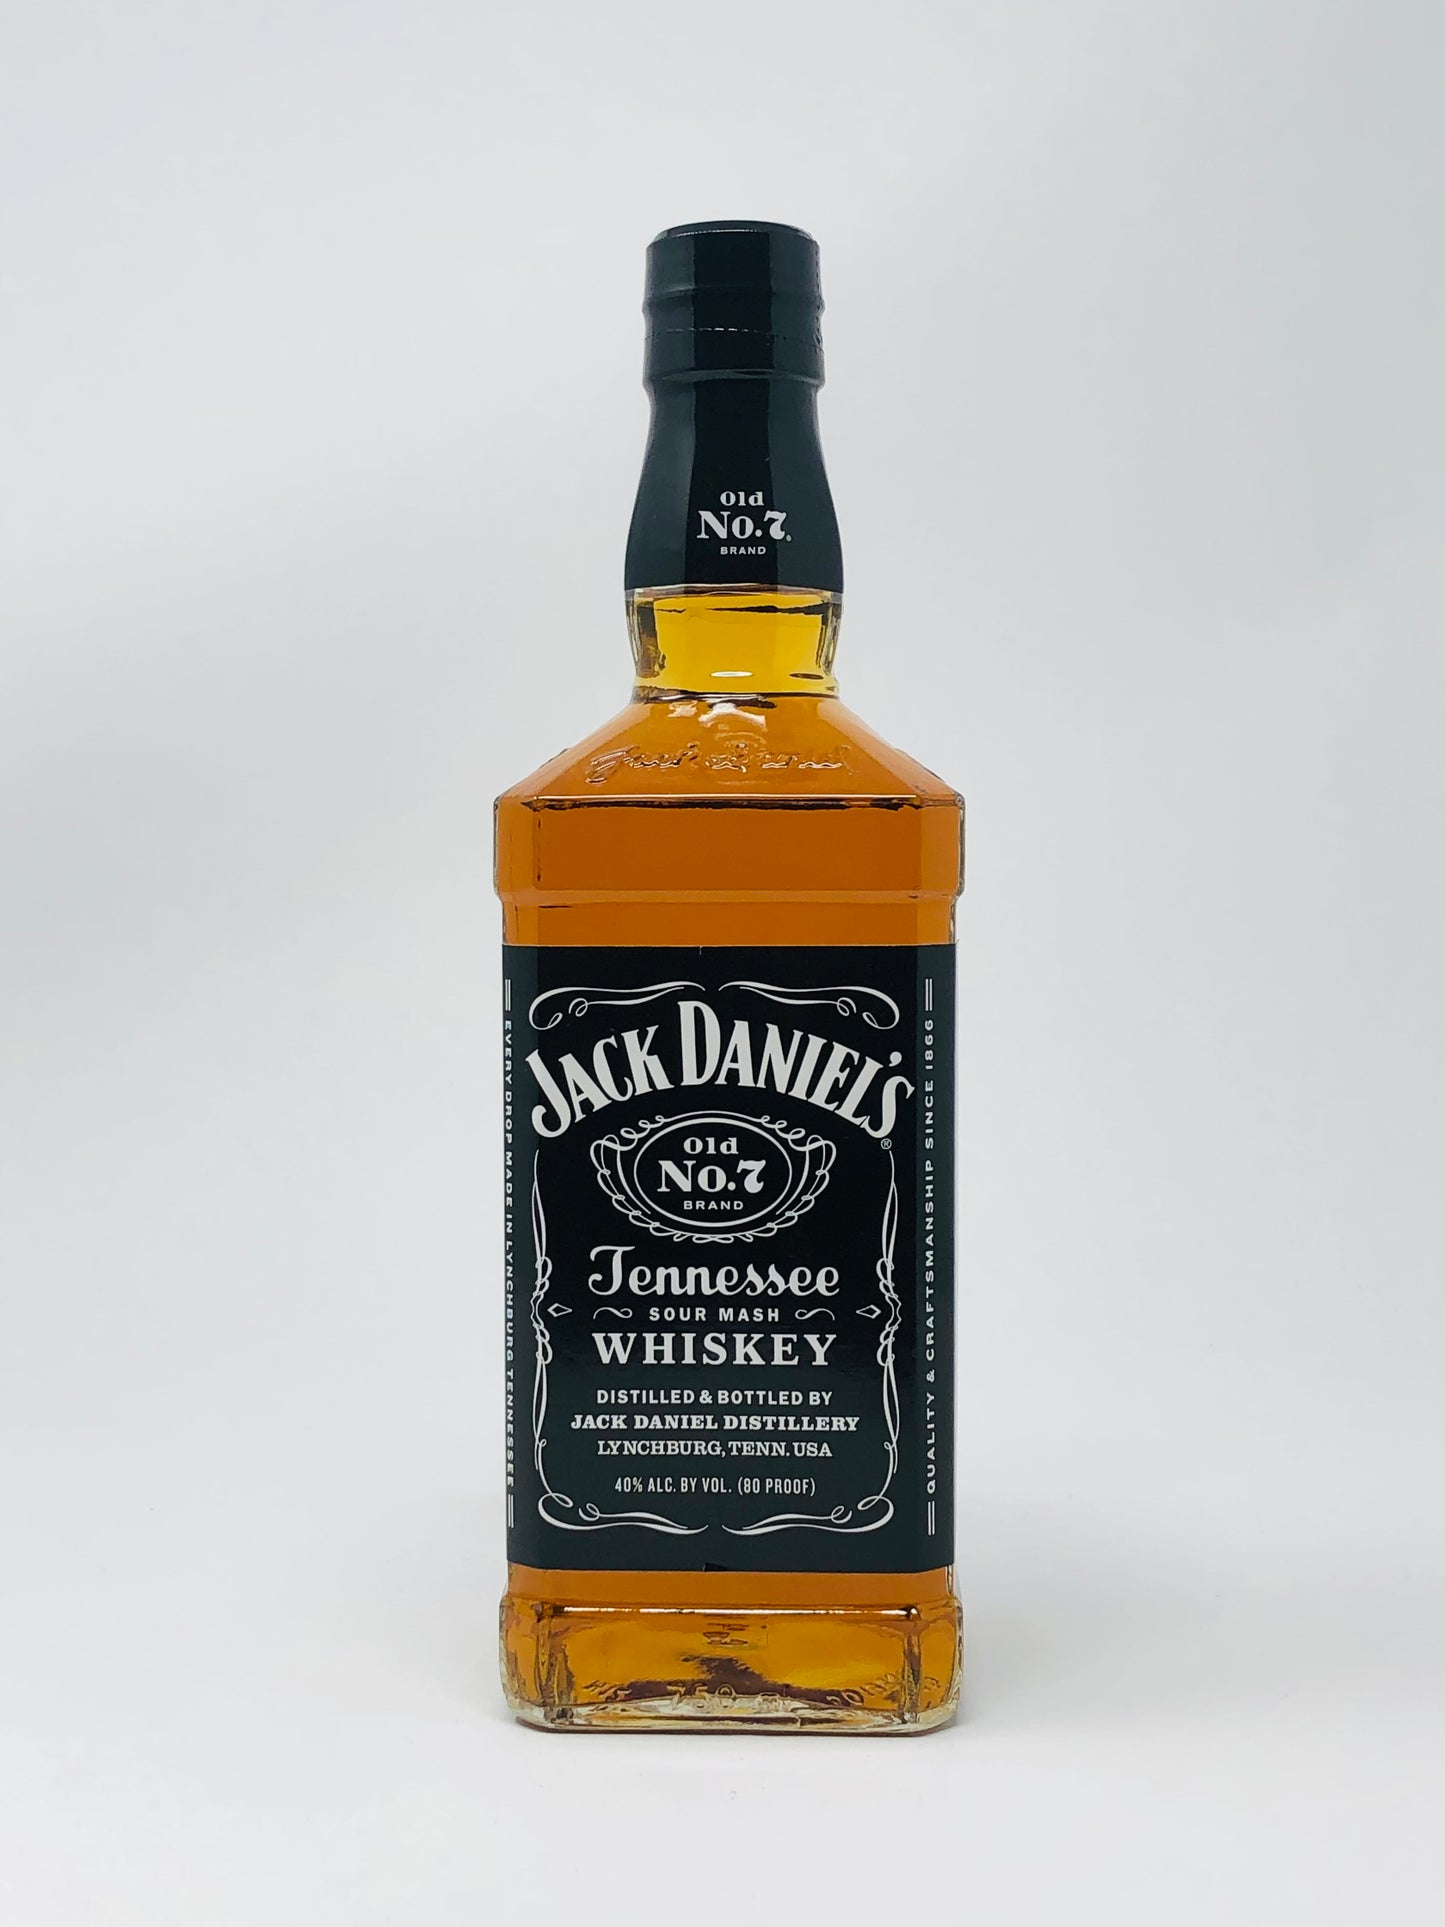 Jack Daniel’s Old No. 7 Tennessee Sour Mash Whiskey 750ml